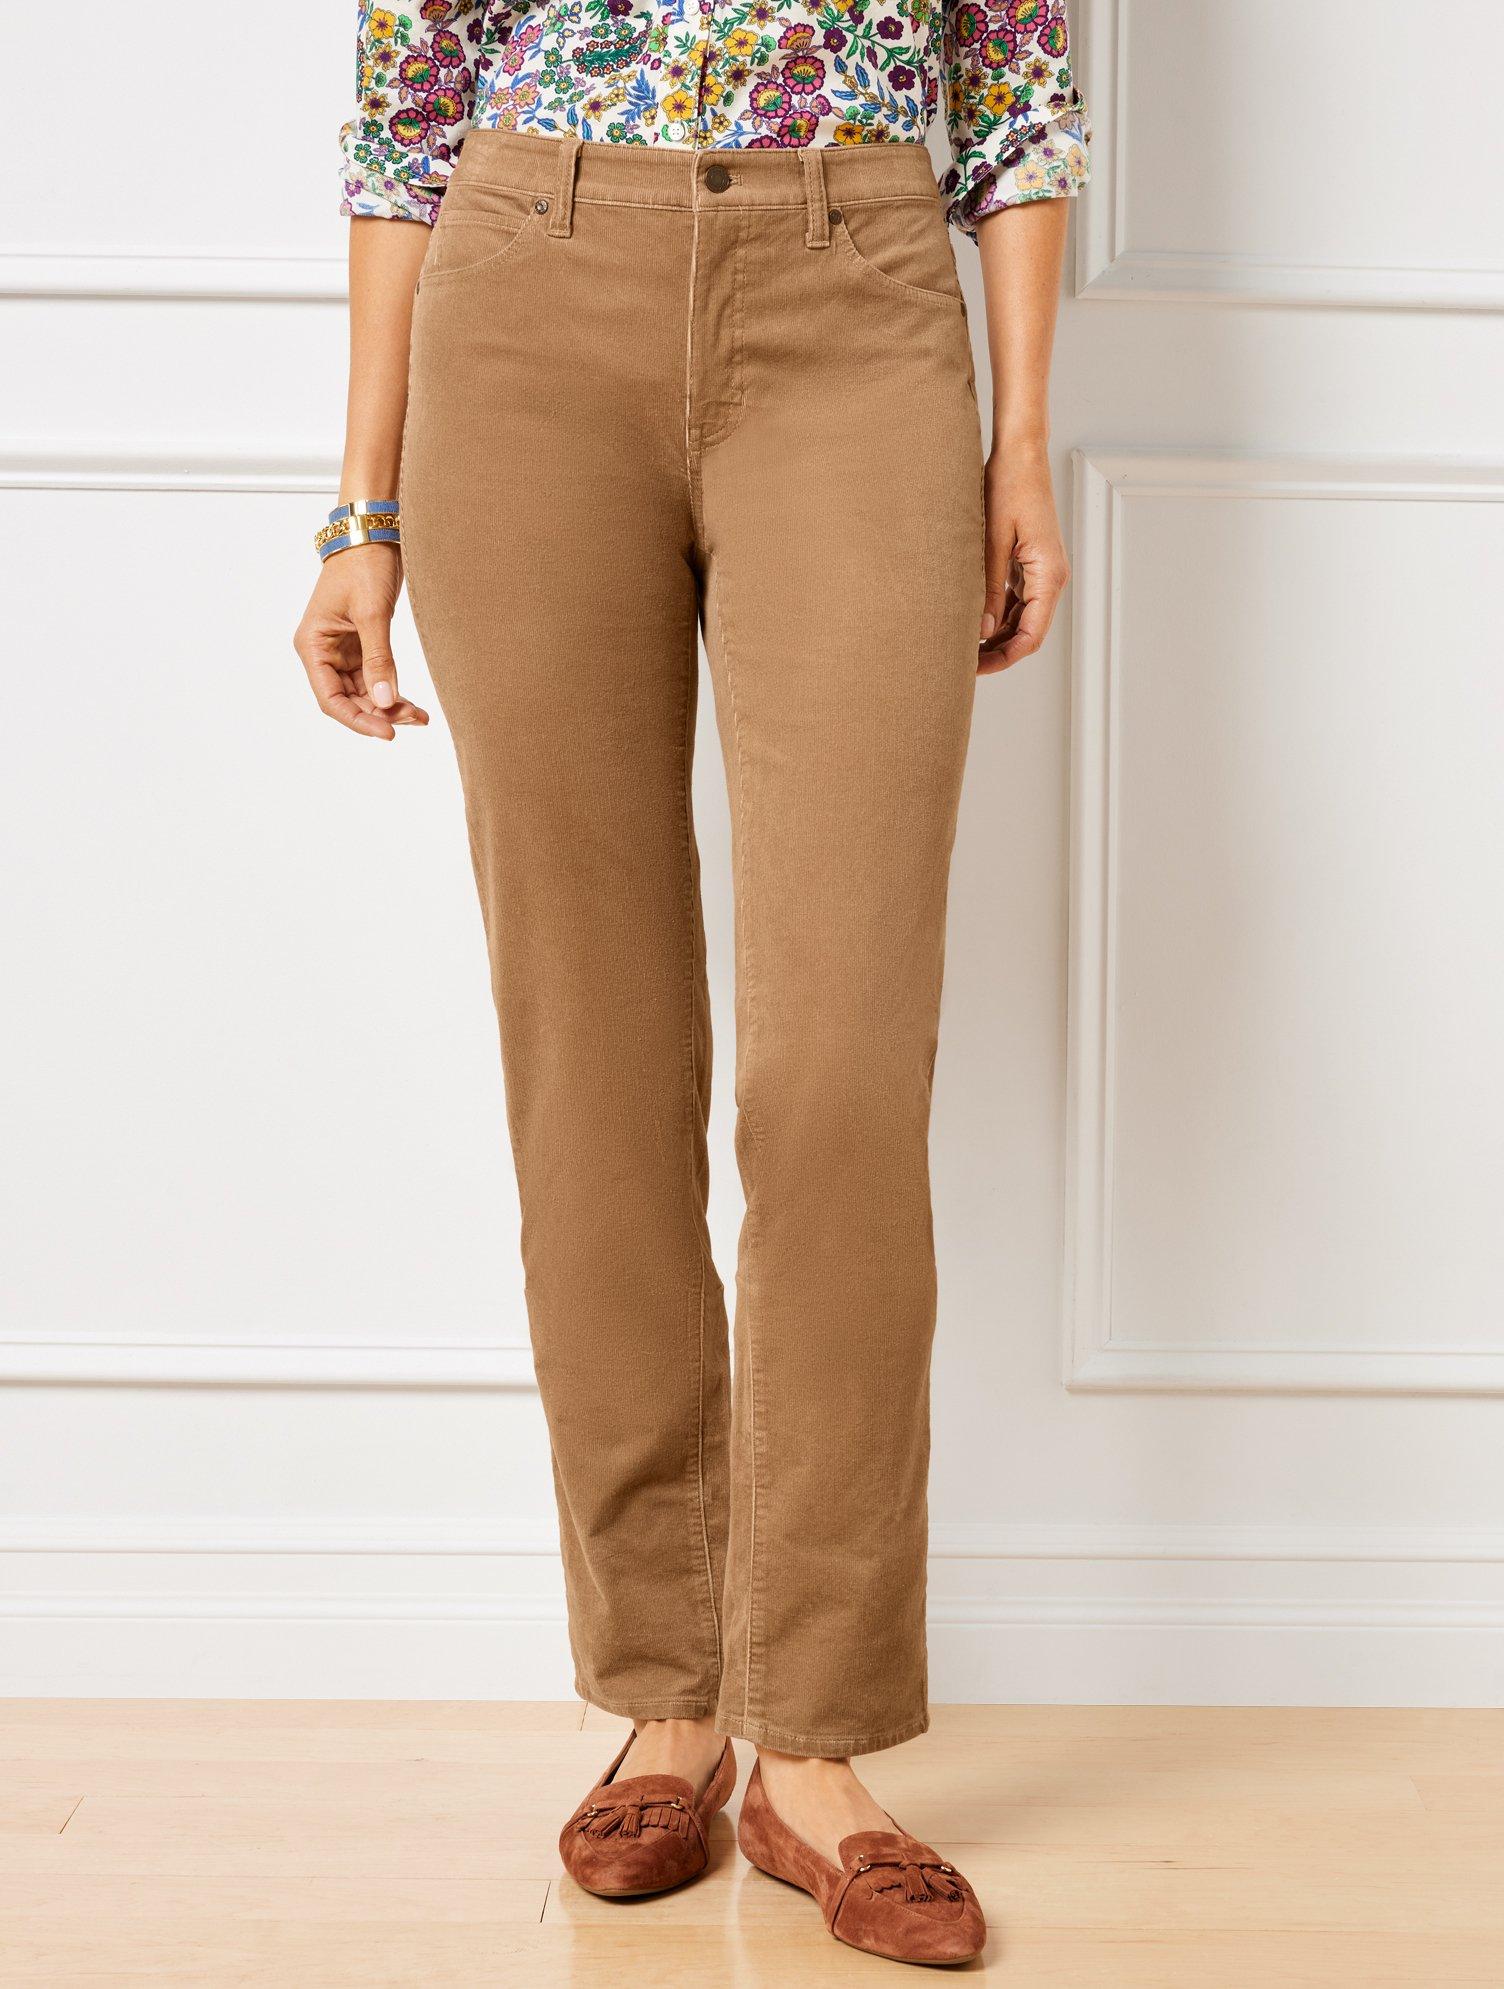 Talbots Stretch Corduroy Straight Leg Pants in Natural